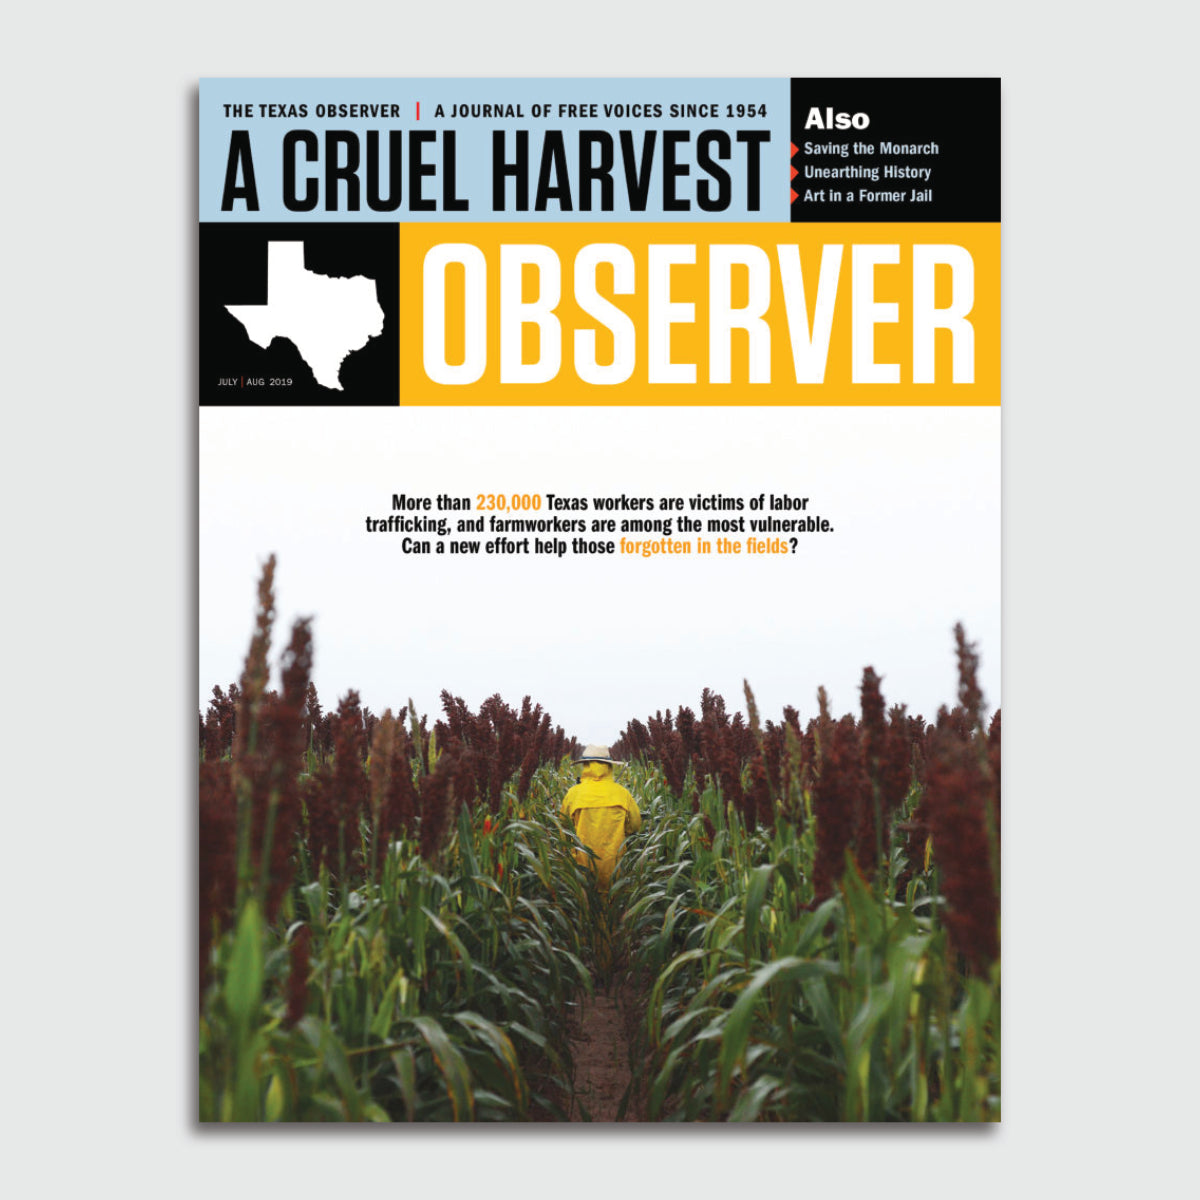 Texas Observer Magazine - July/August 2019